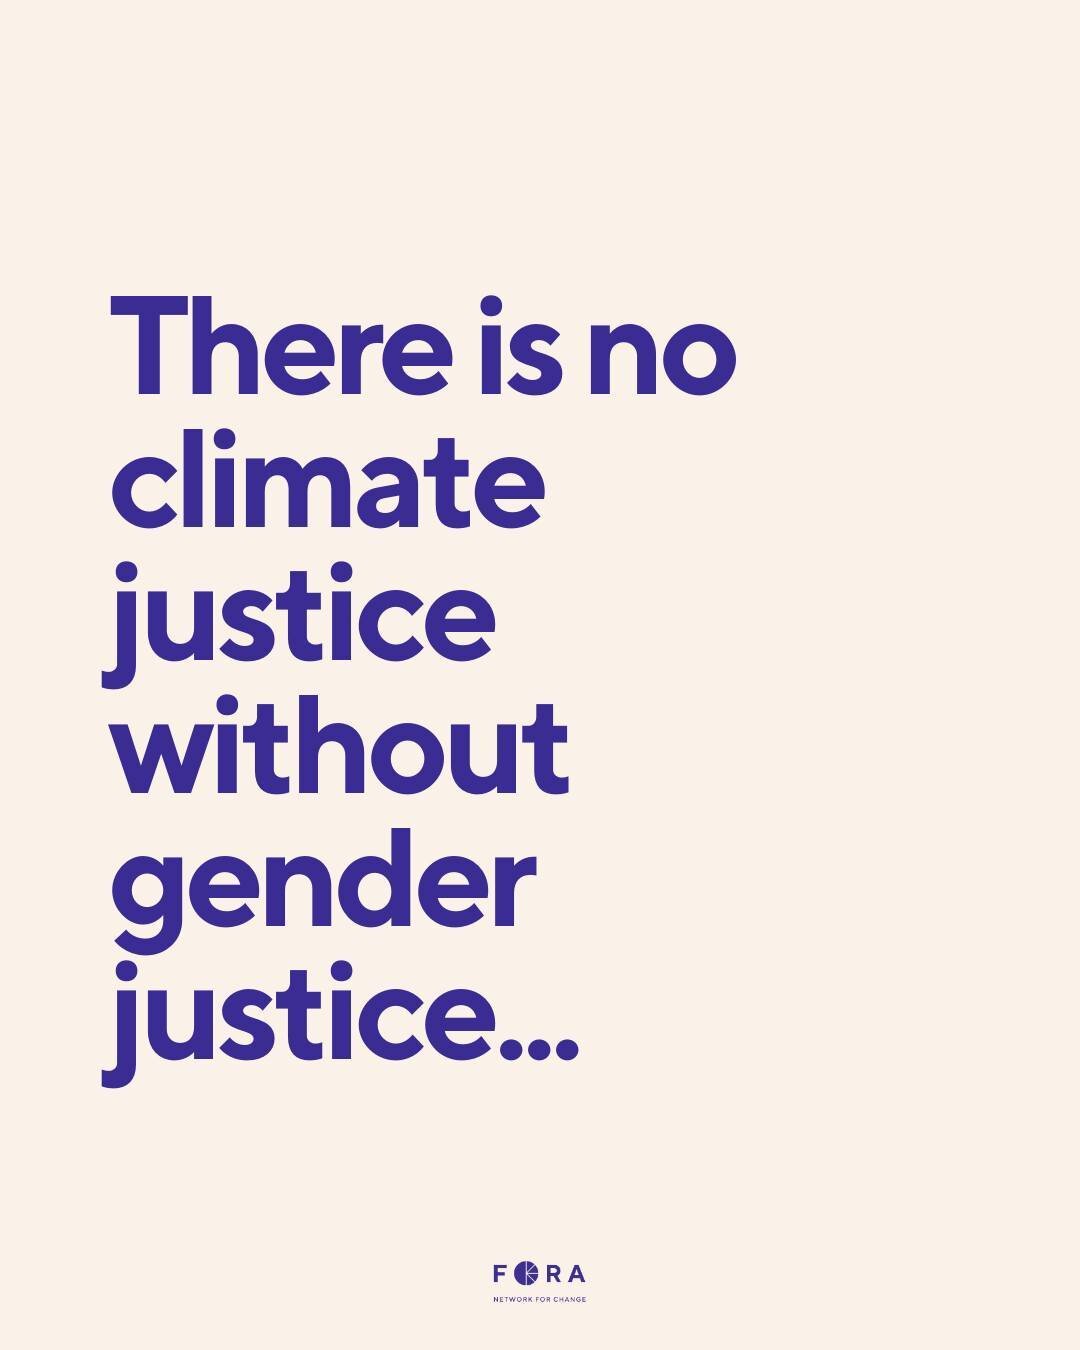 How are gender equity, youth leadership, and climate justice connected? That's what we're thinking about ahead of #EarthDay! 🌏 

We know there can be no climate justice without gender justice... &amp; no climate justice without youth leadership.

Sw